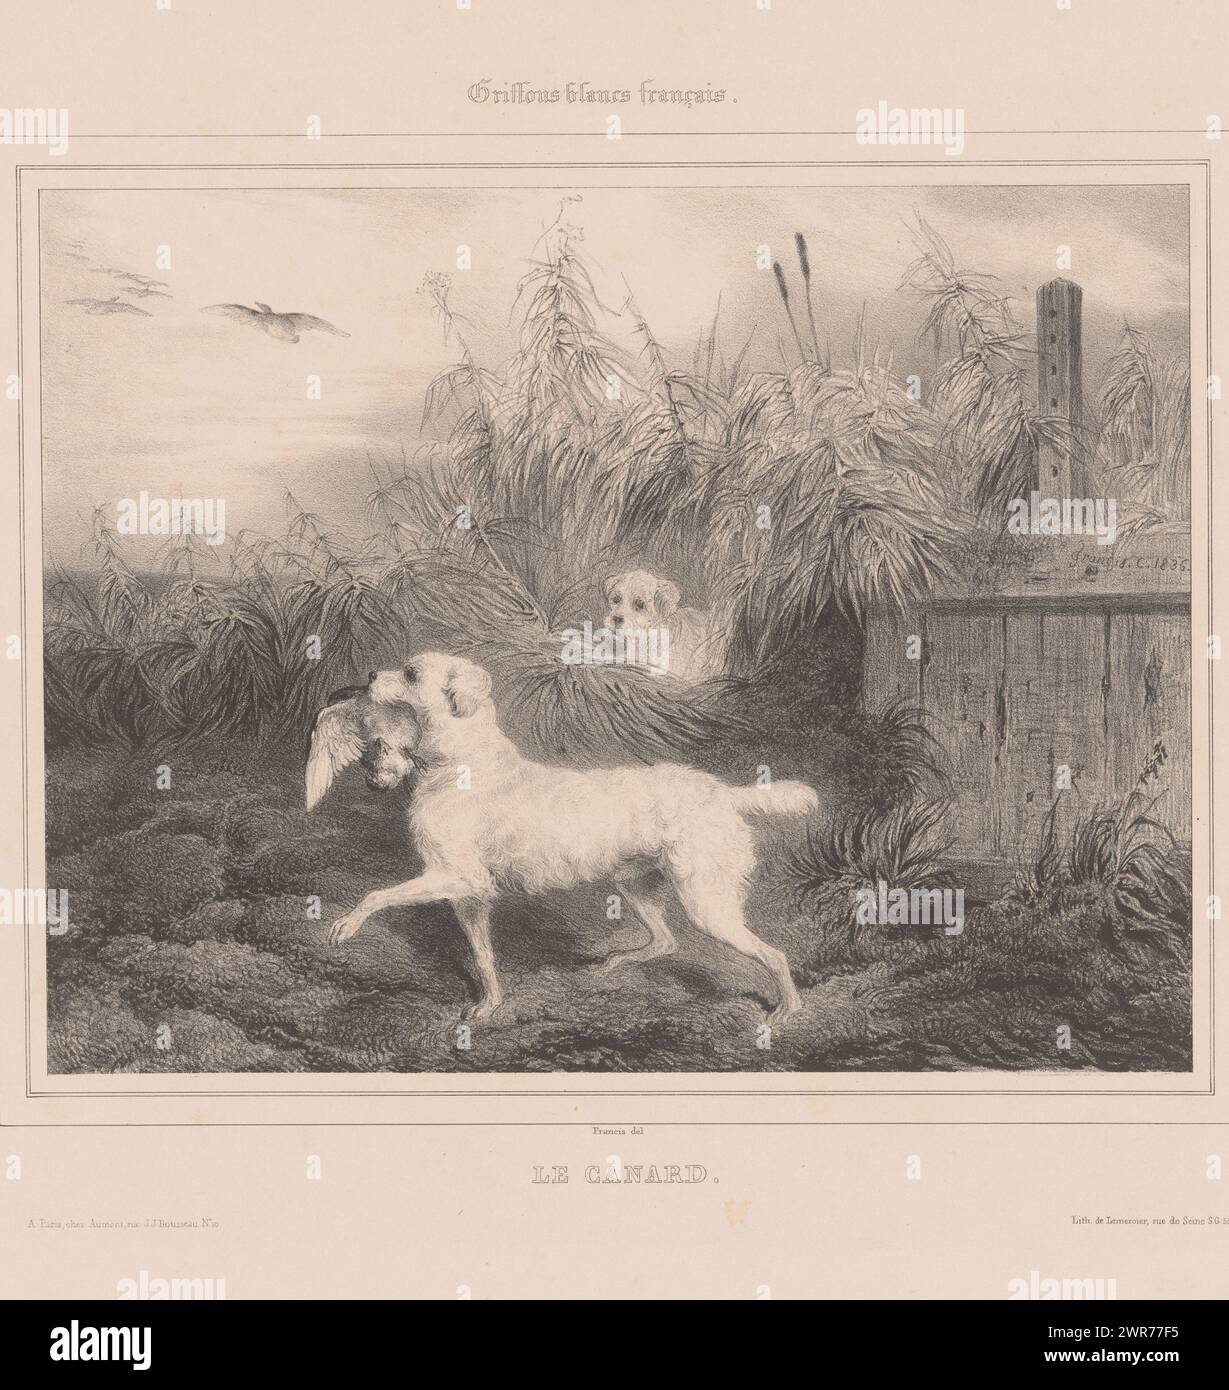 White French hunting dog has caught a duck, Griffons blancs français. Le canard (title on object), Hunting dogs (series title), Suite de Chiens (series title on object), Print is part of a cover with six prints., print maker: Francis Conscience, after painting by: Francis Conscience, printer: Joseph Rose Lemercier, Paris, 1837, paper, height 355 mm × width 556 mm, print Stock Photo